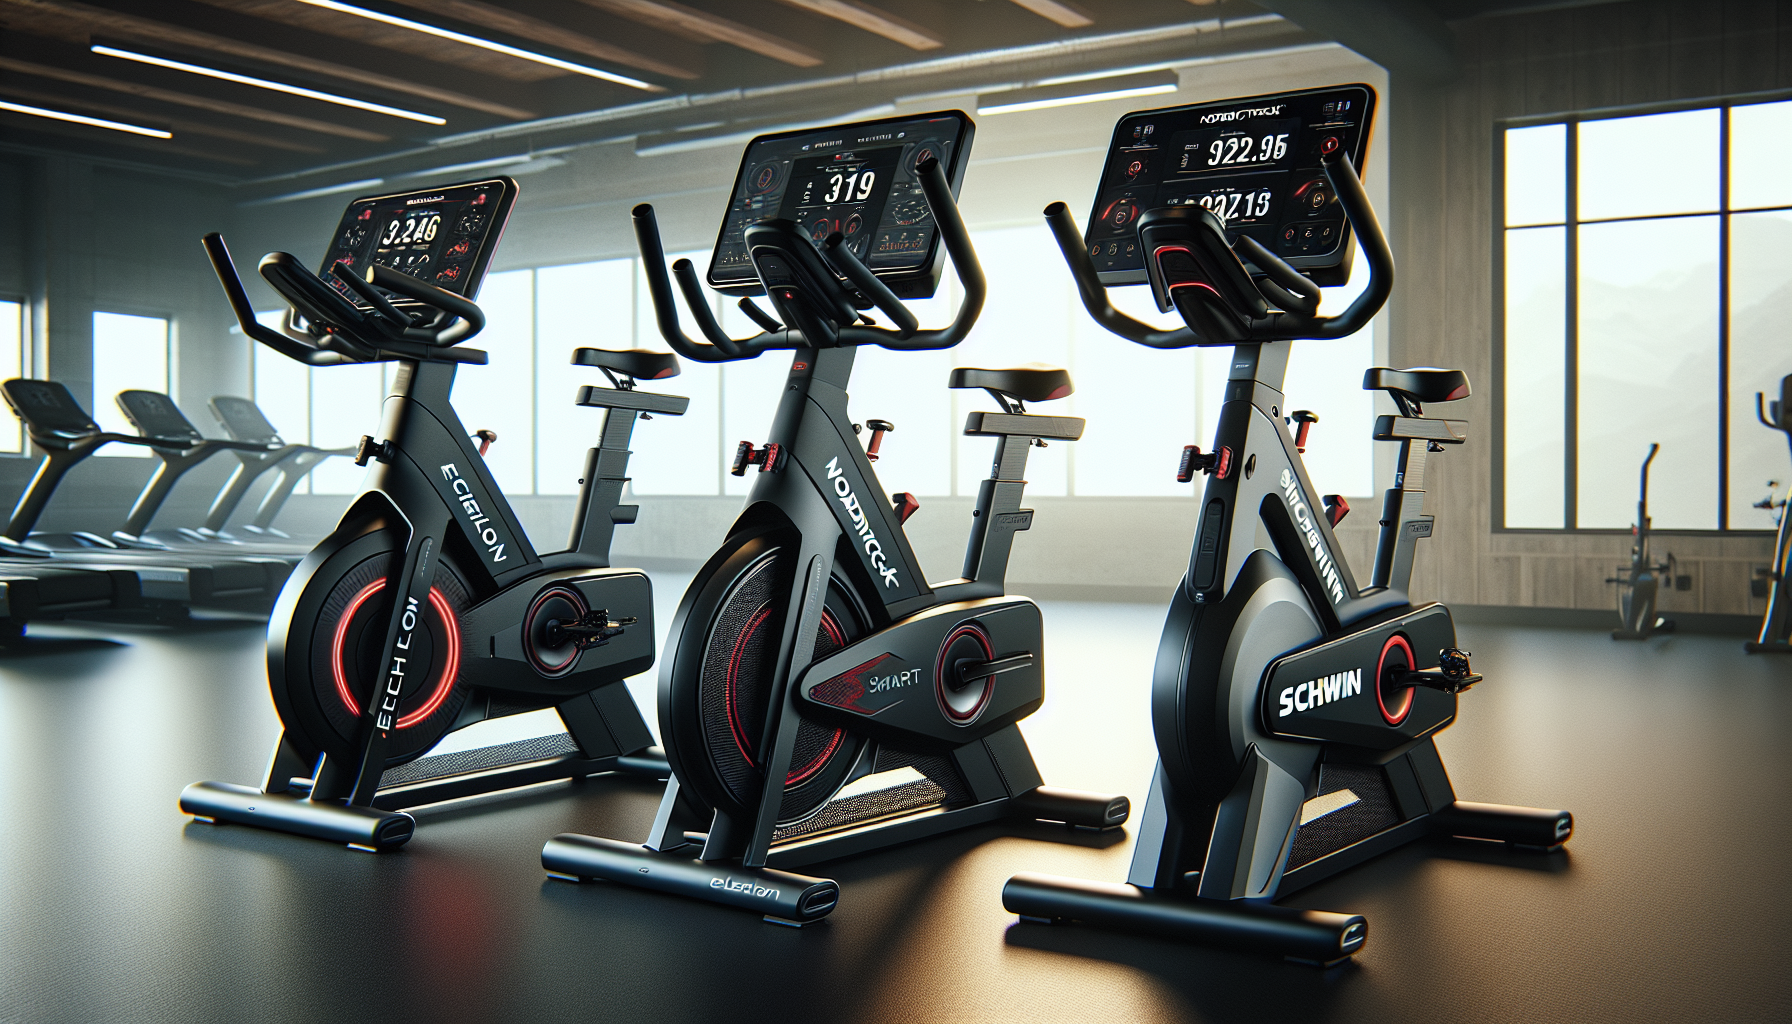 Comparison of Echelon Smart Connect, NordicTrack S22i, and Schwinn IC4 exercise bikes